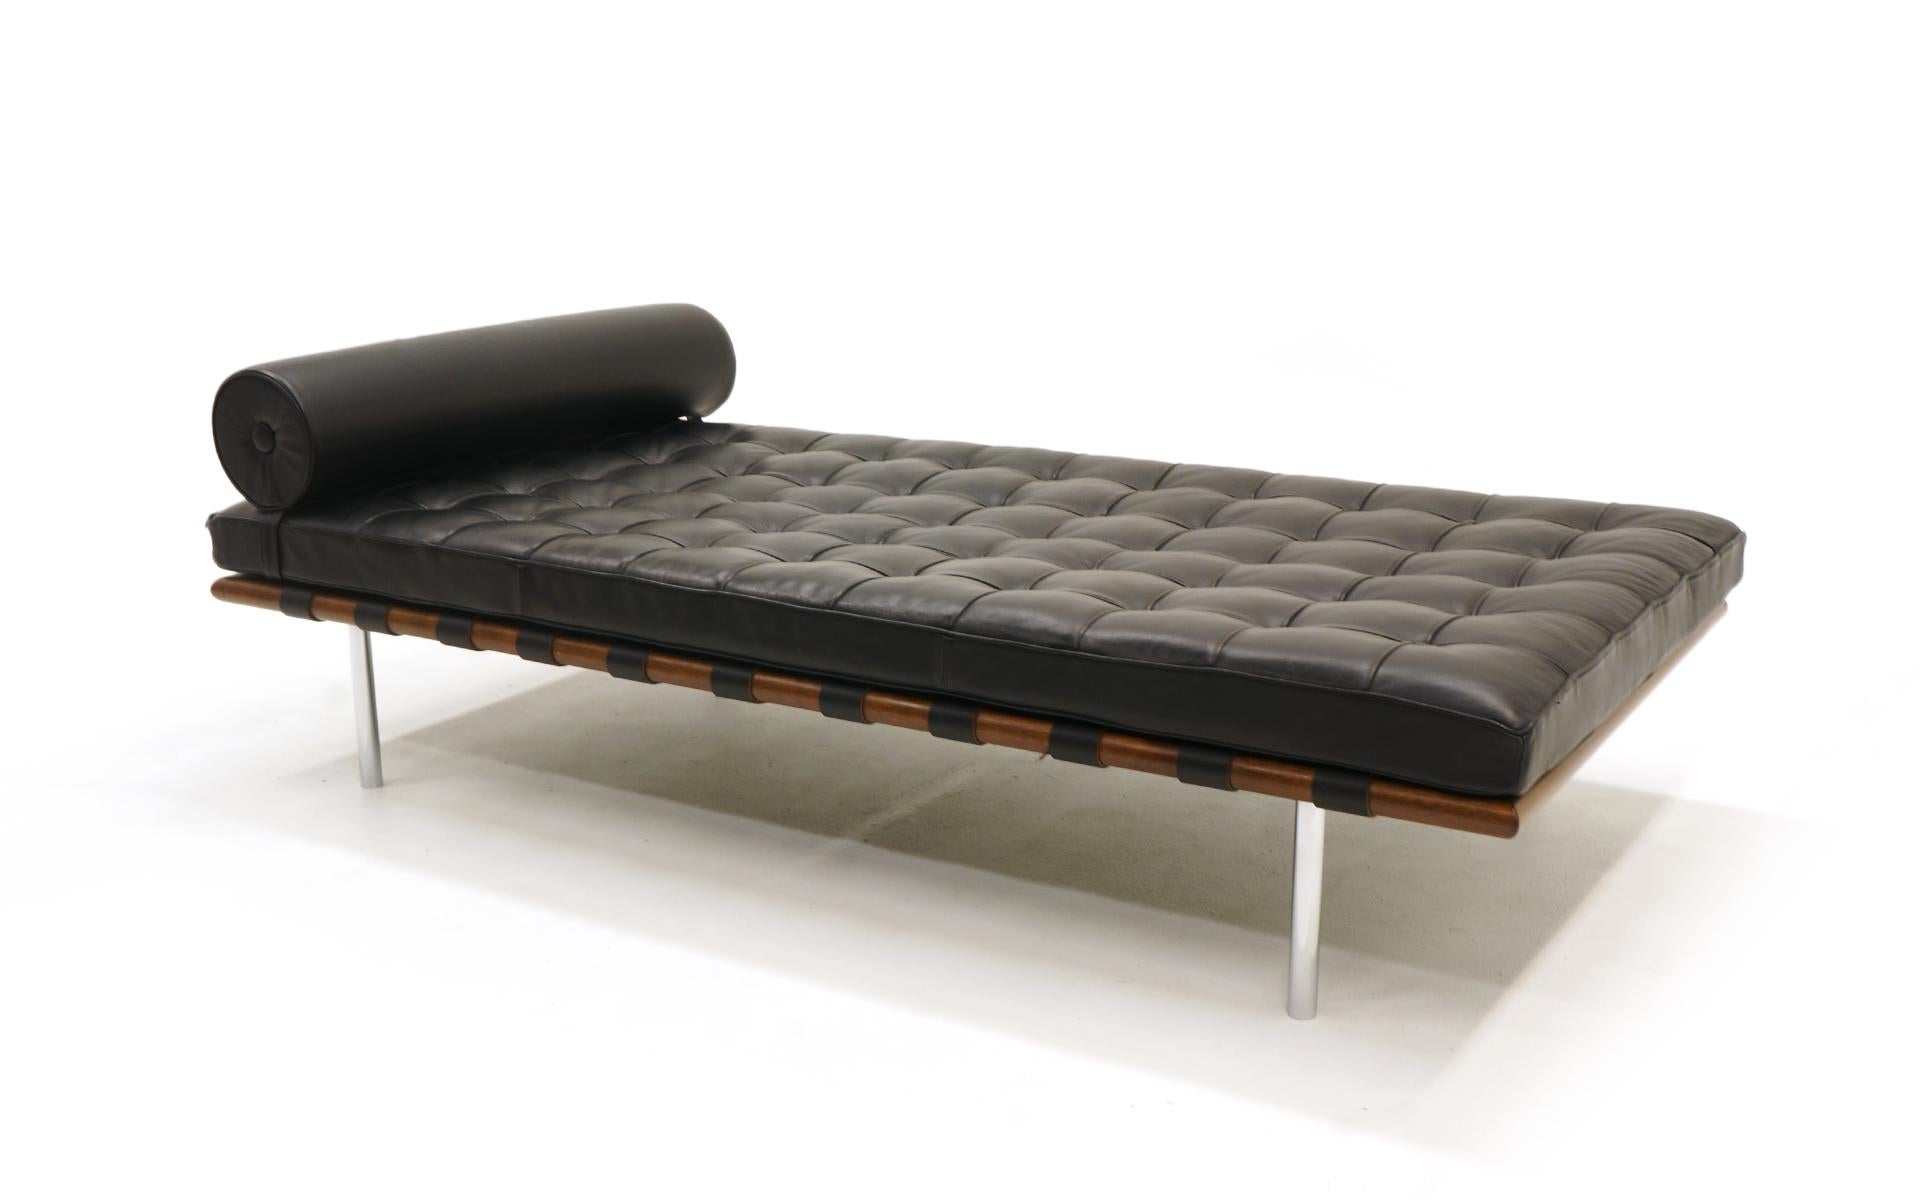 Ludwig Mies van der Rohe Barcelona daybed for Knoll. Walnut frame, steel legs with polished finish, black Leather is in very good to excellent condition. No rips, tears or distracting scratches.